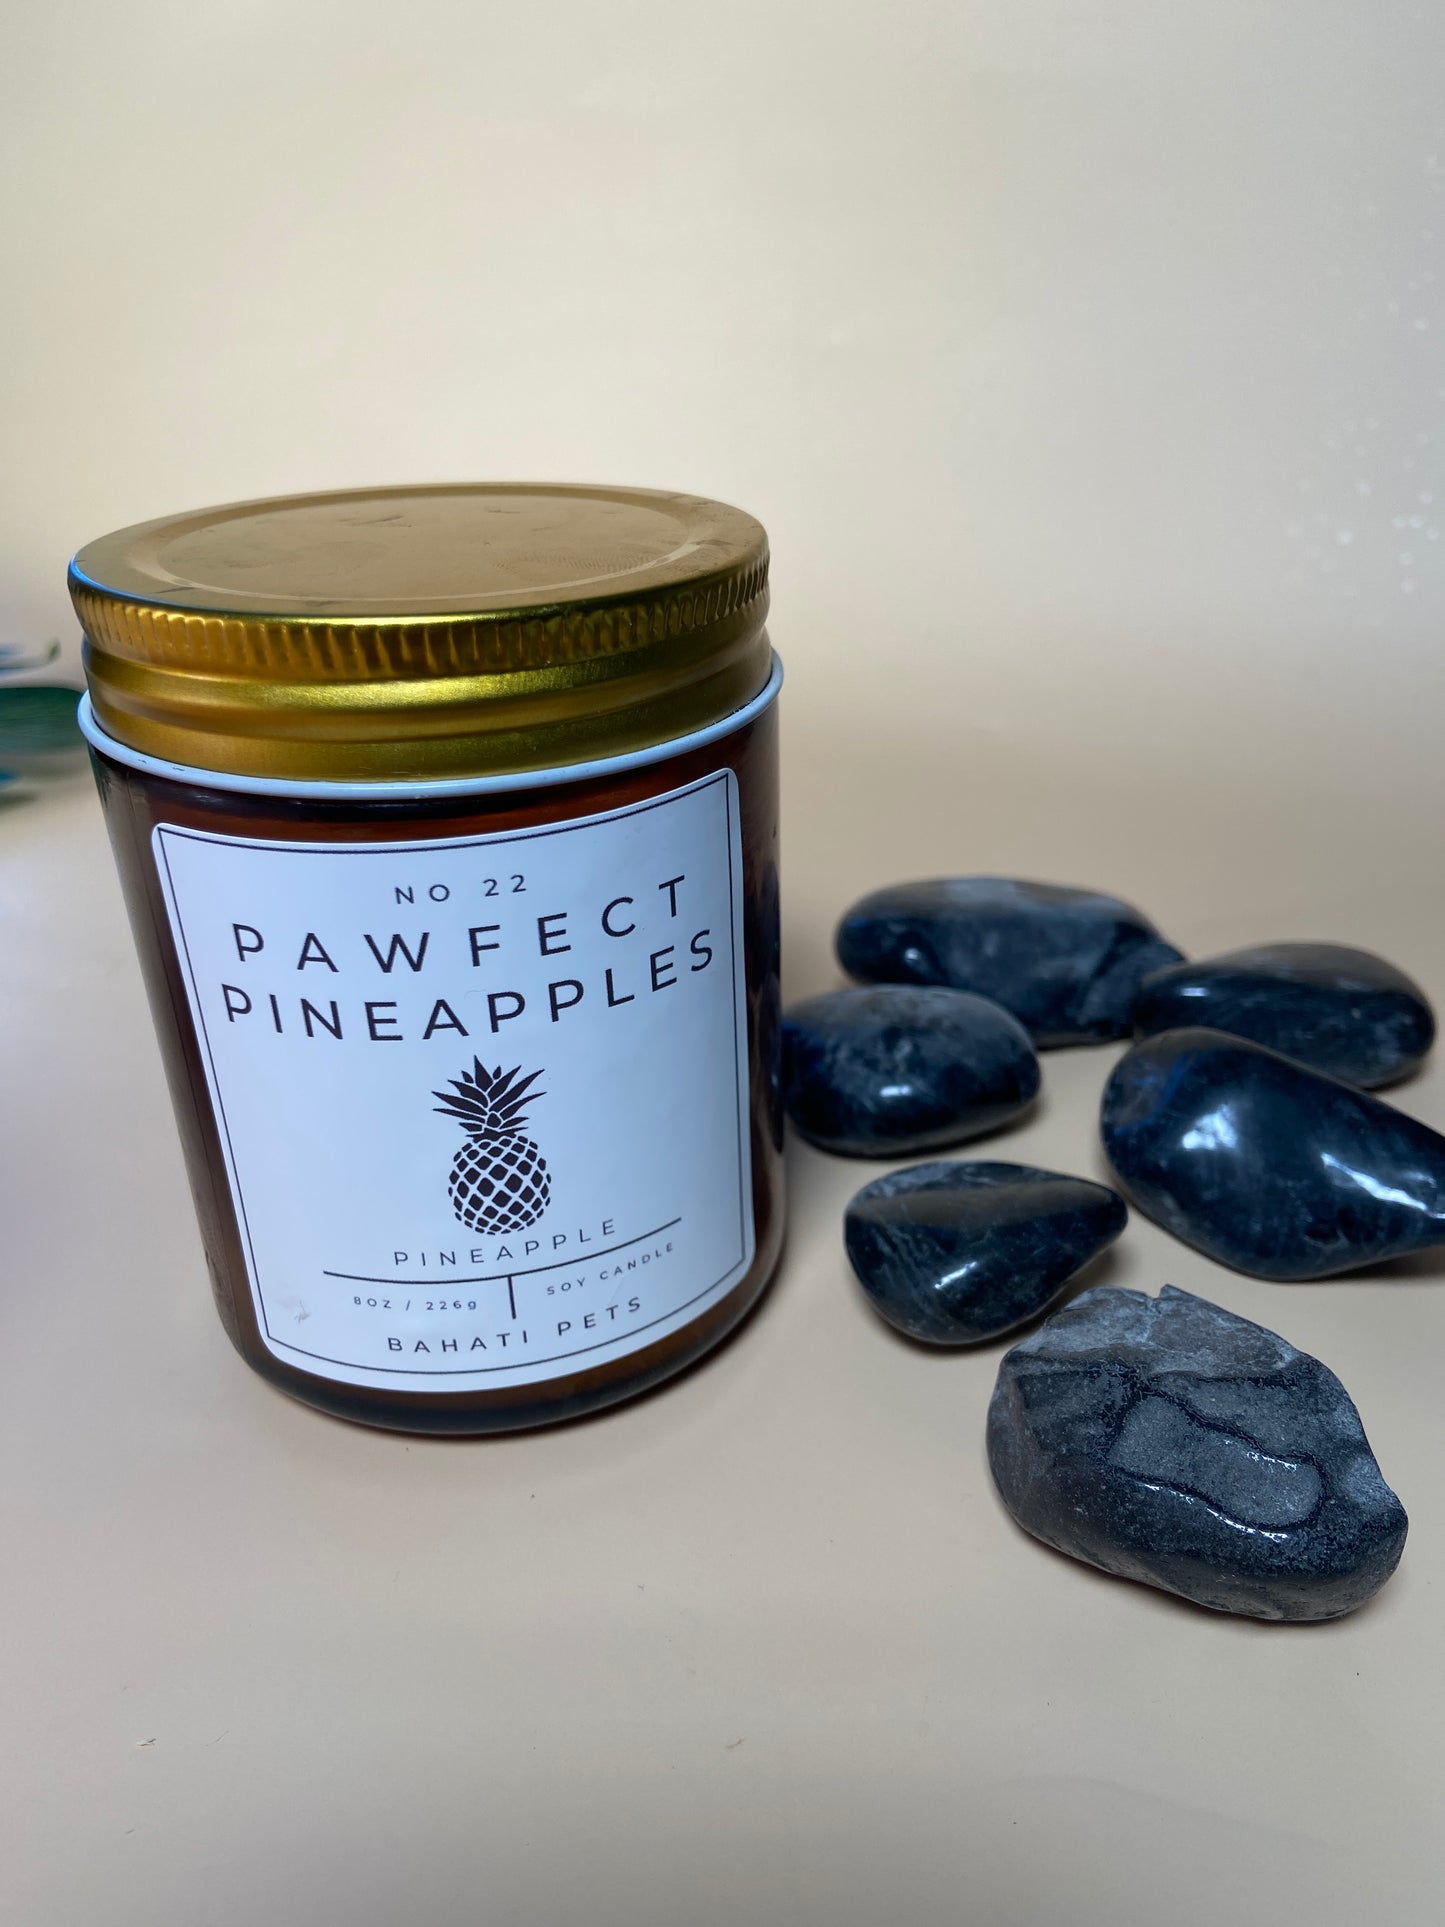 Pawfect Pineapples - 8oz Soy Candle